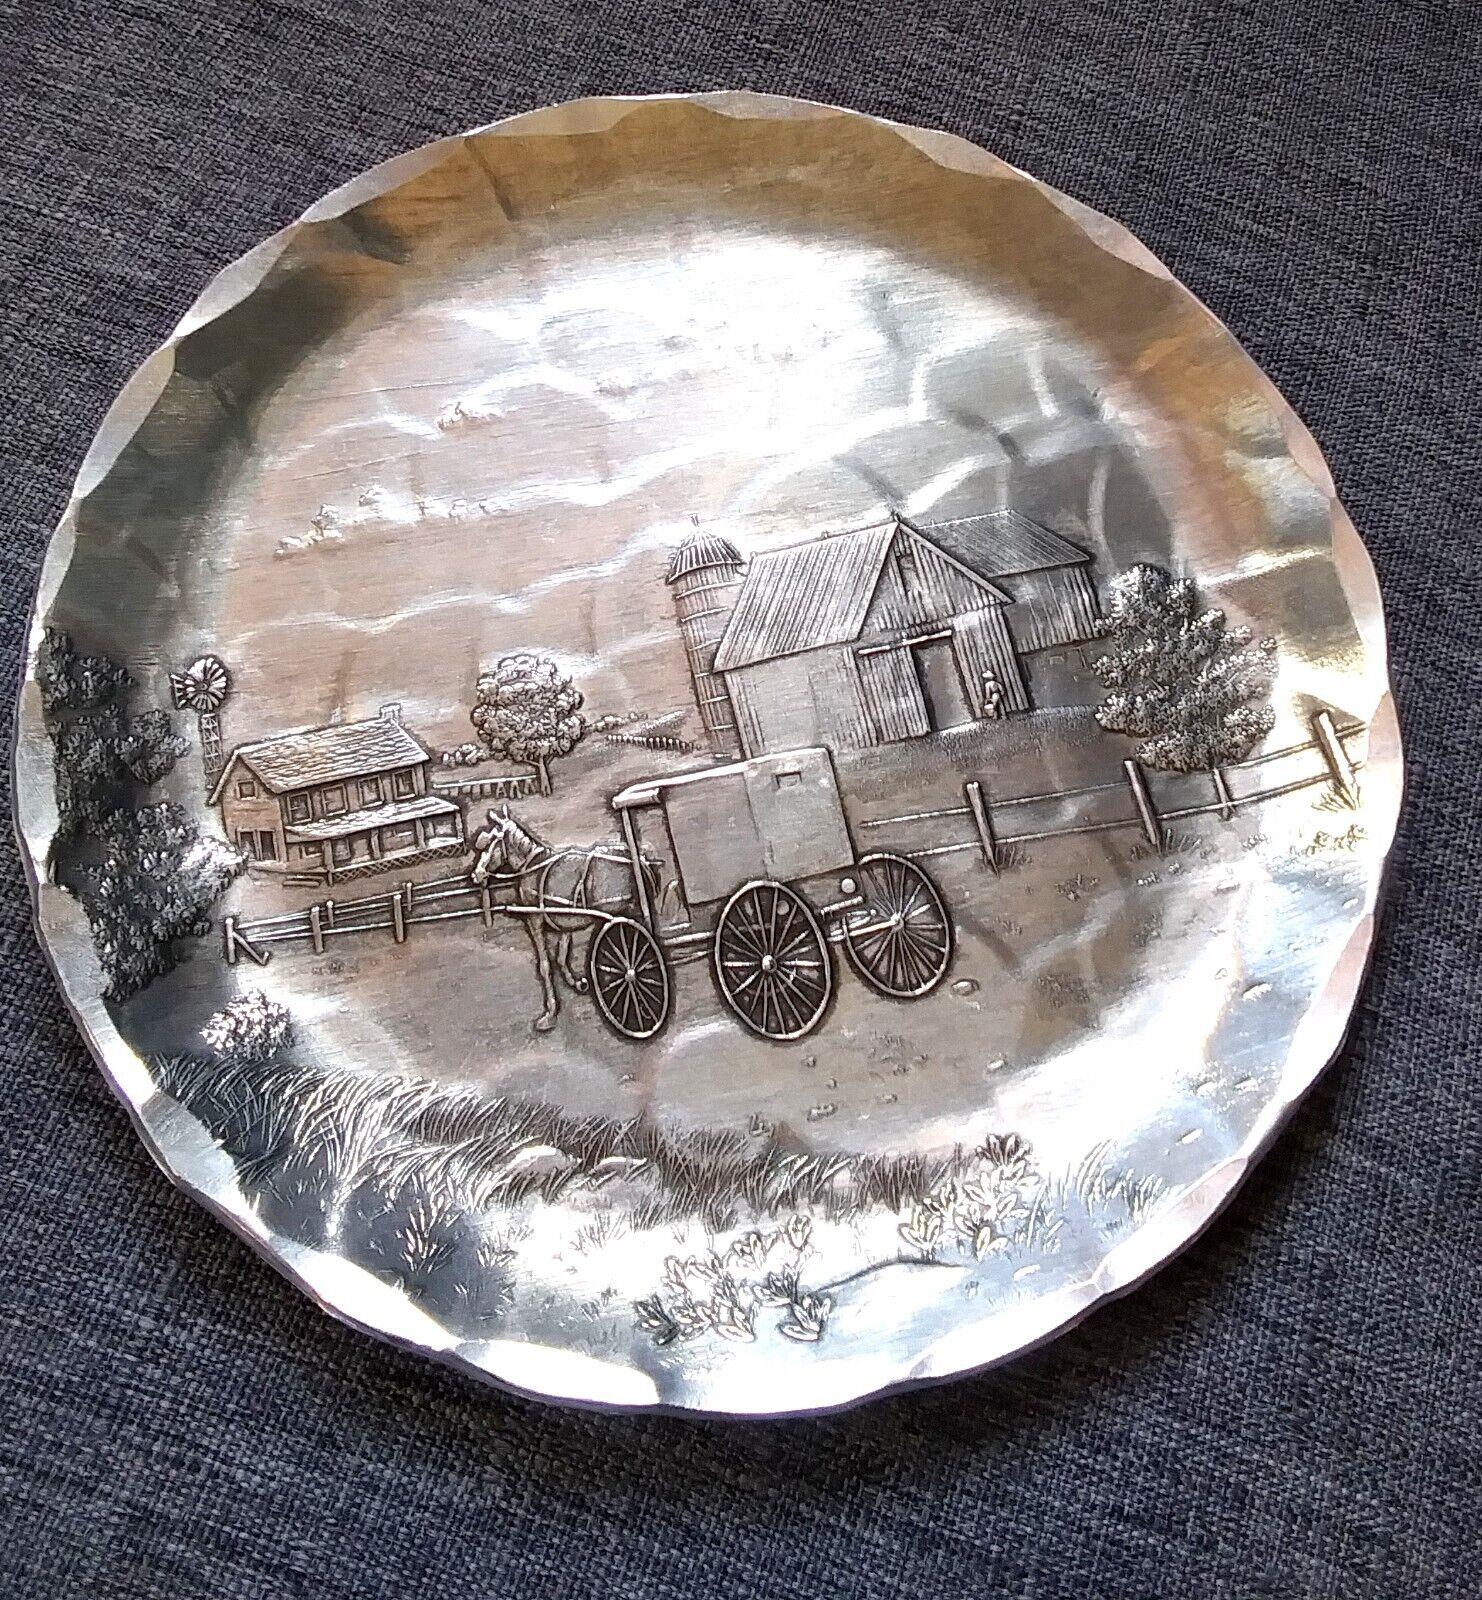 Vintage Wendell August Forge USA Farm Scene Hammered Coaster Tray Dish